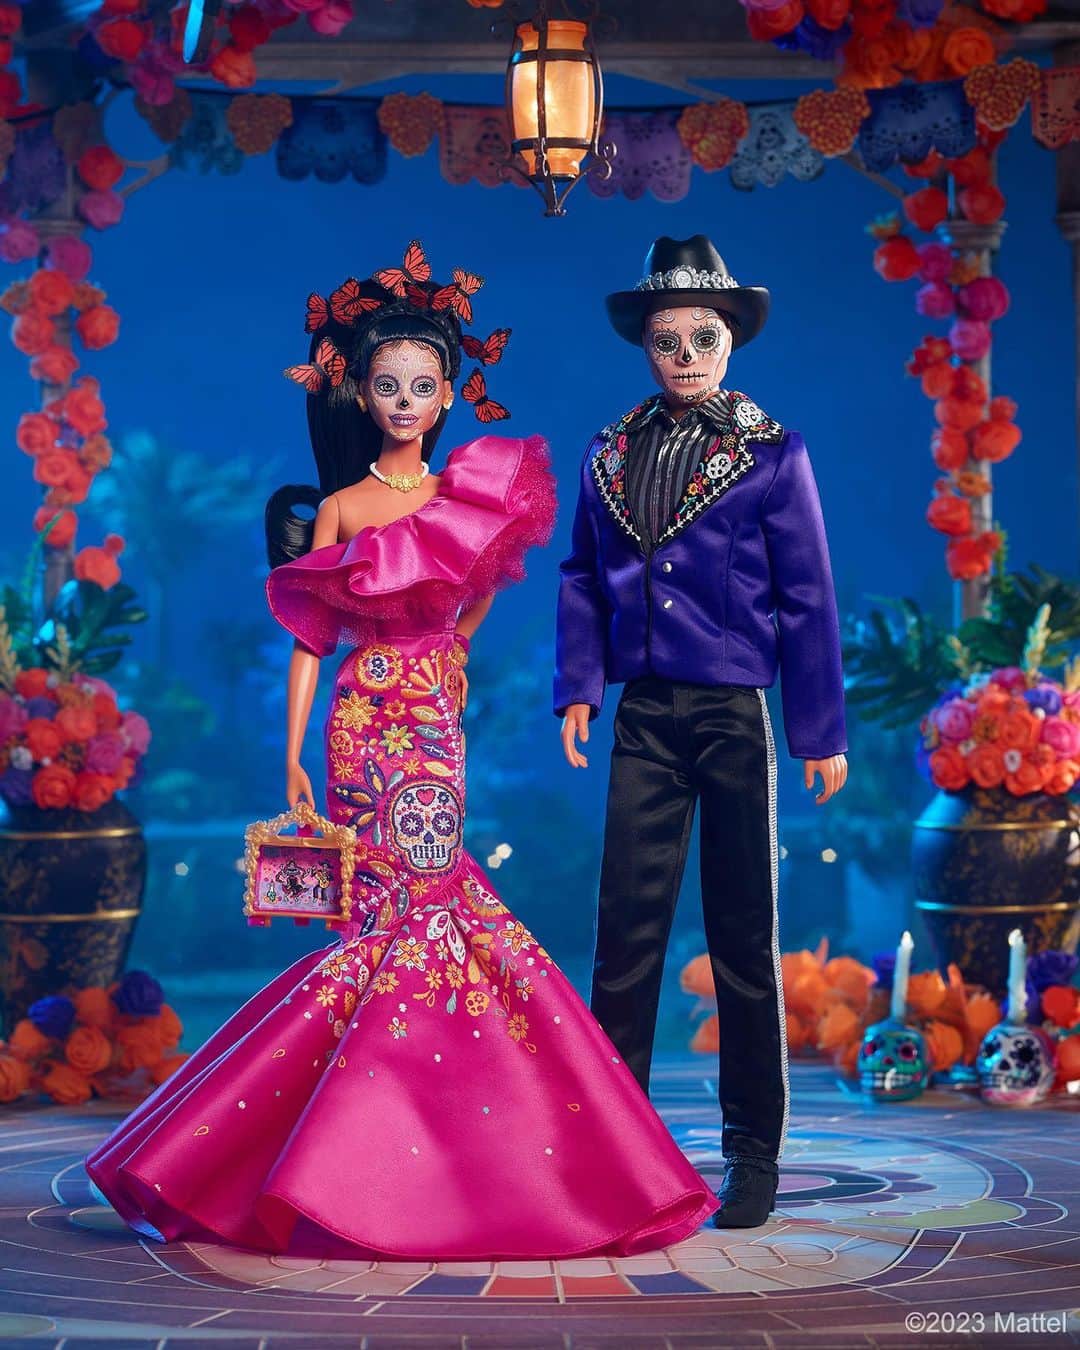 Mattelのインスタグラム：「@Barbie is marking the fifth year of the #Barbie Día de Muertos collection, by honoring the spirit of the upcoming Mexican festival of remembrance with newly unveiled designs paying homage to its customs and symbols. 🕯️   This year, Barbie wears a beautiful satin pink gown with vibrant calavera and floral embellishments, a crown of symbolic monarch butterflies float around her, and she carries a miniature ofrenda diorama with traditional cempasúchil accents. Ken wears a striking dark blue jacket with intricately embroidered lapels, a metallic striped shirt, a hat with silver detailing, and sleek black boots. Both Barbie and Ken wear traditional sugar skull face paint.   May the 2023 #DiaDeMuertos Barbie and Ken dolls become a treasured part of your holiday tradition.   #HispanicHeritageMonth」